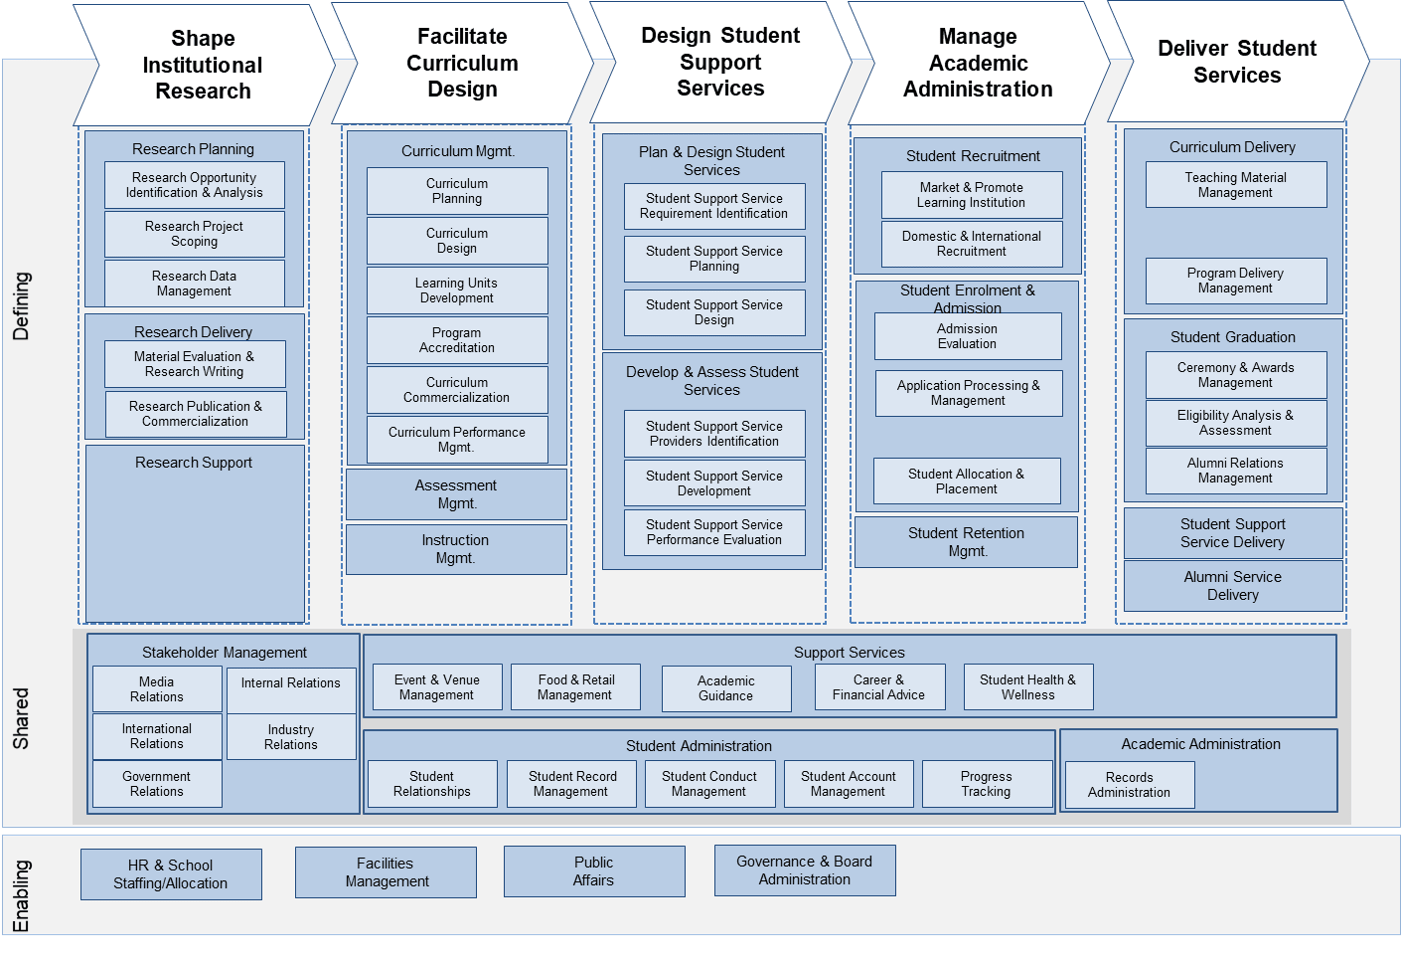 Example business capability map for higher education